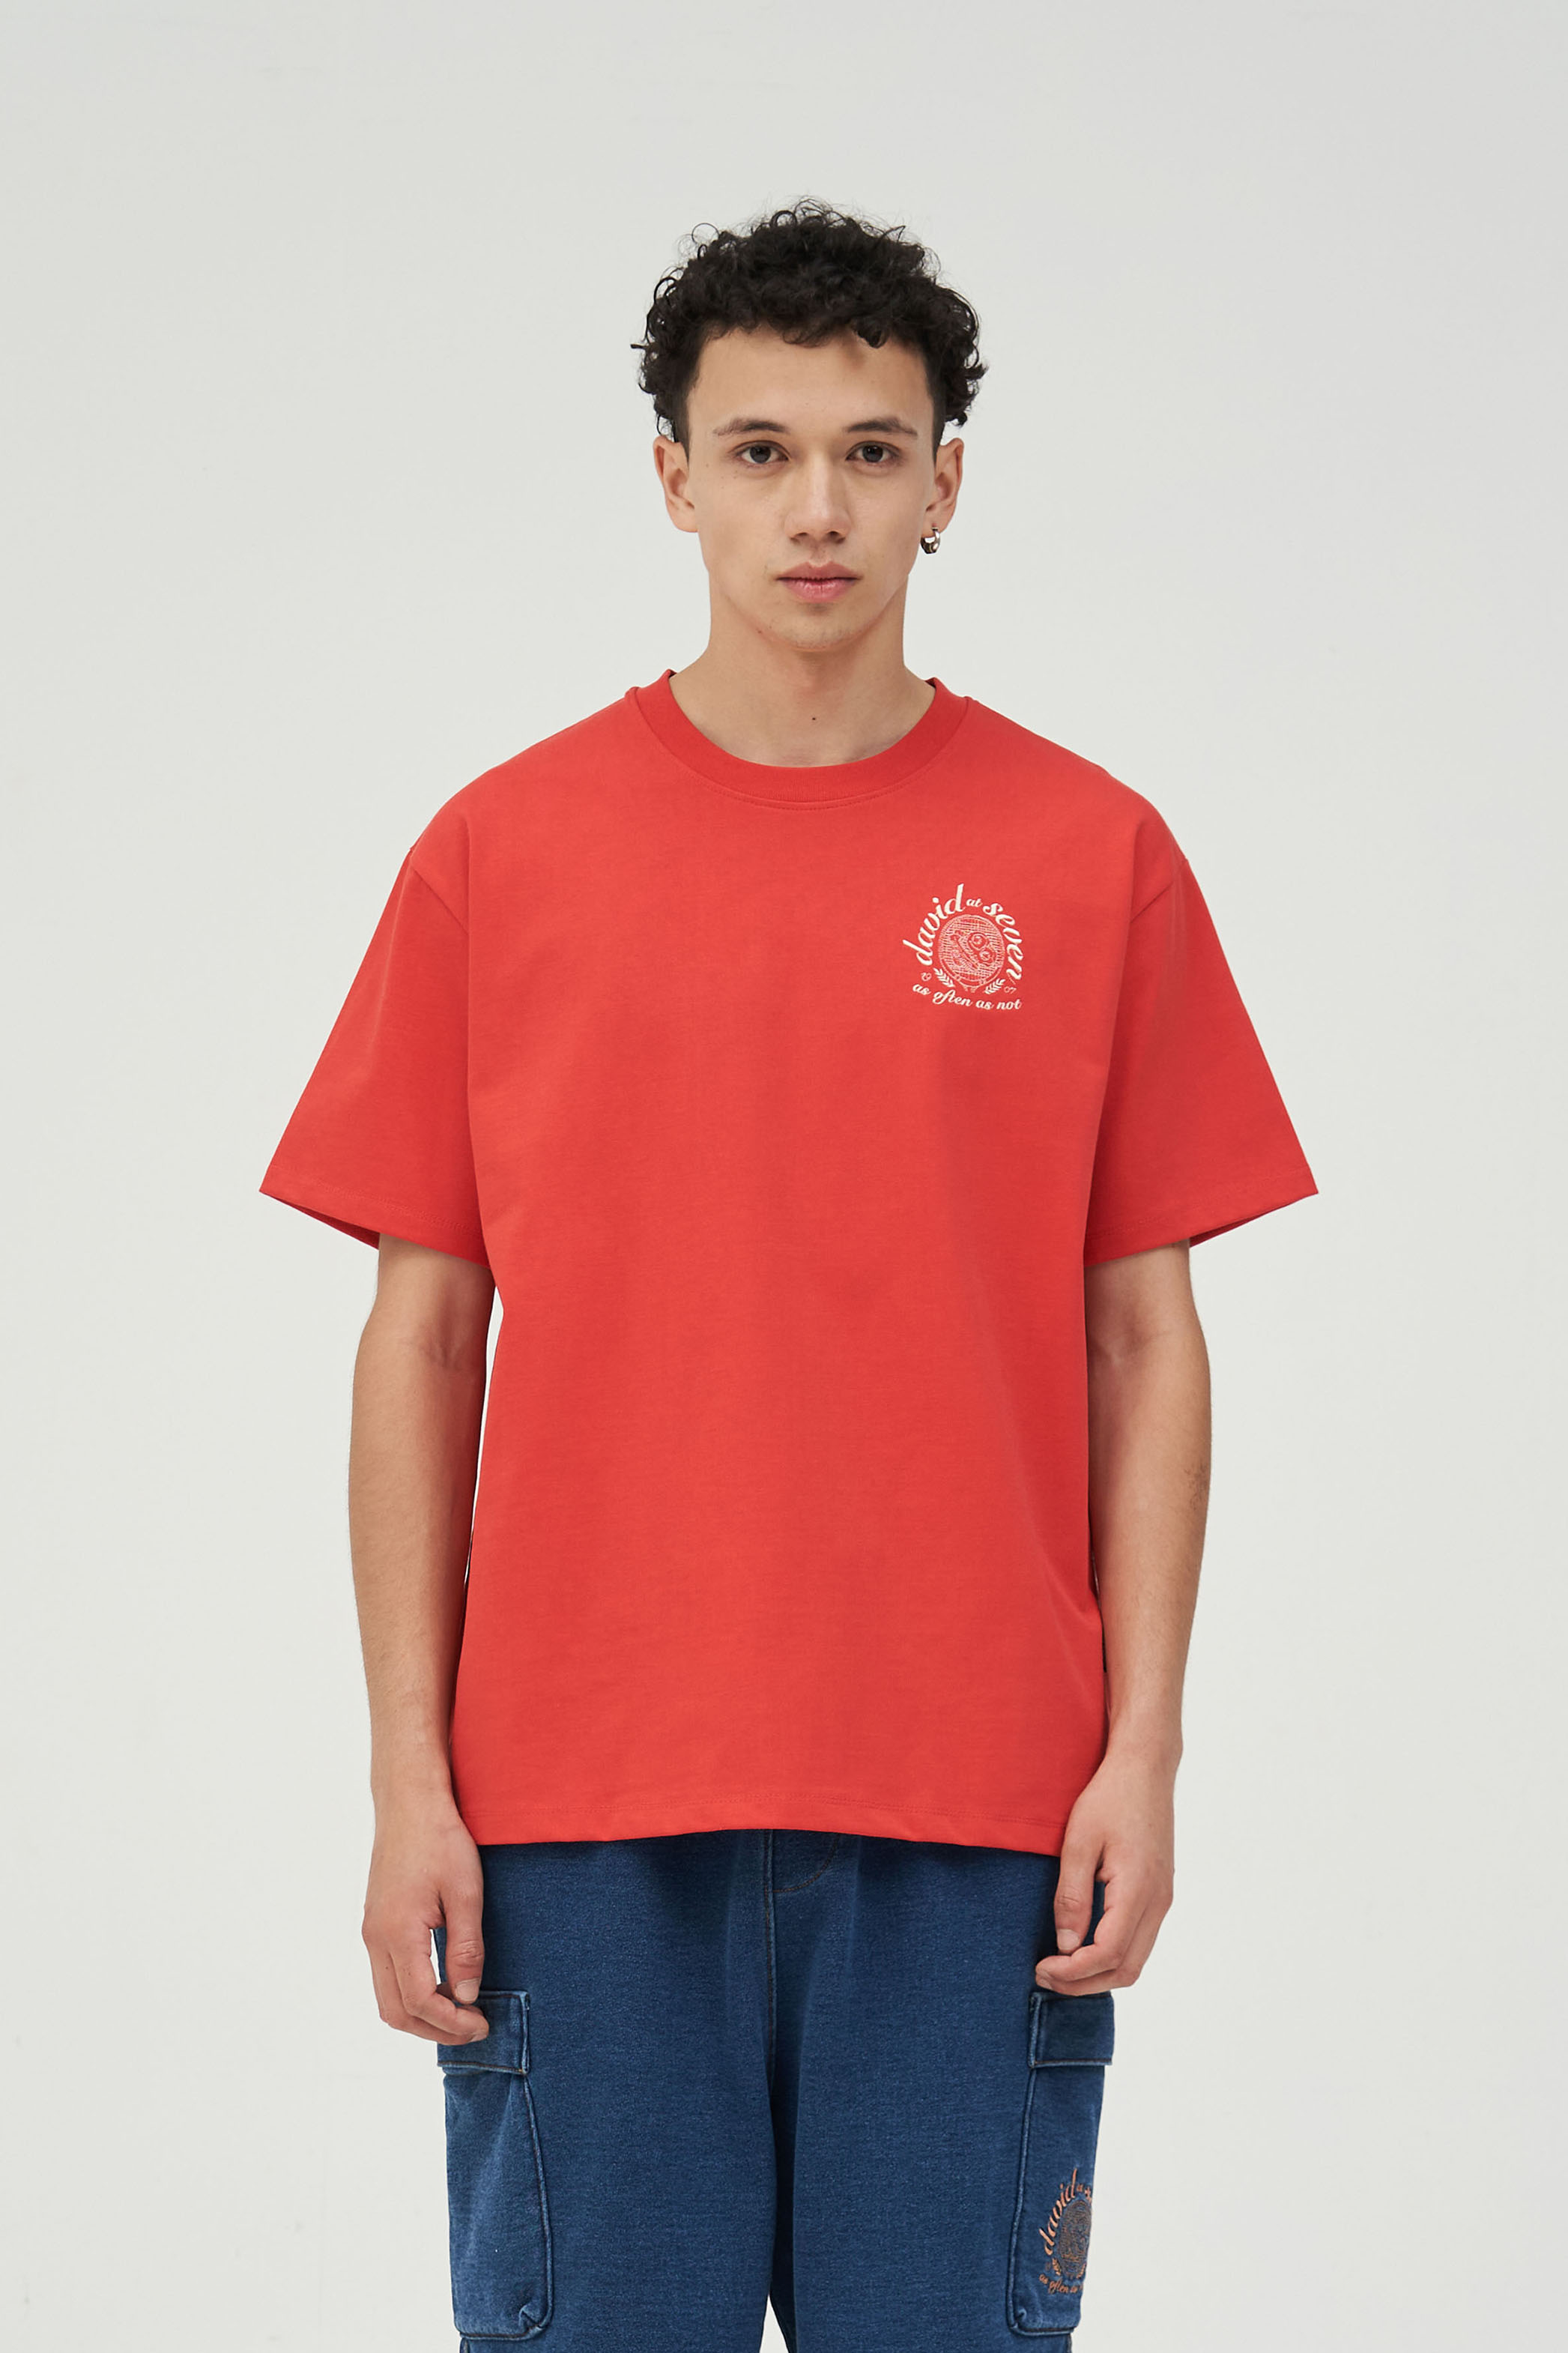 Sunny-Side Up Racket T-shirts_red